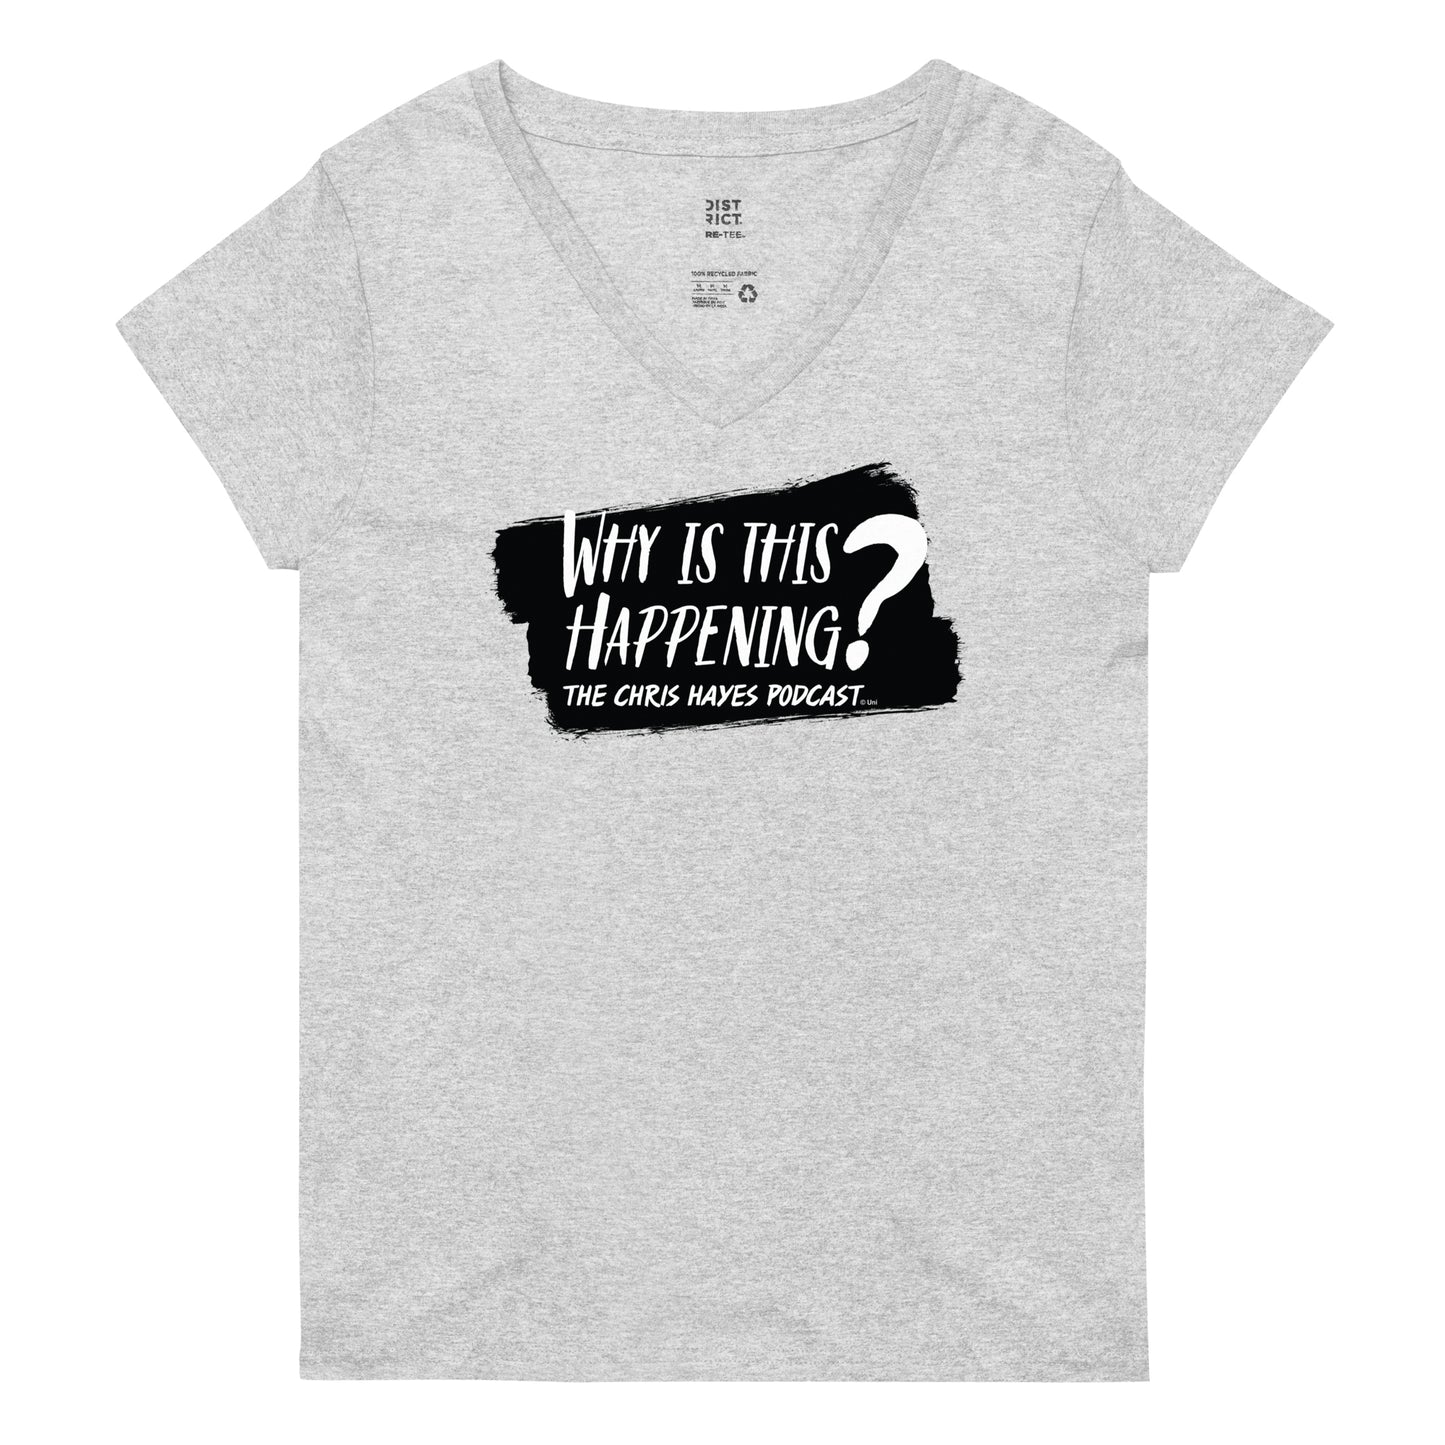 Why Is This Happening? The Chris Hayes Podcast Black Logo V-Neck T-Shirt